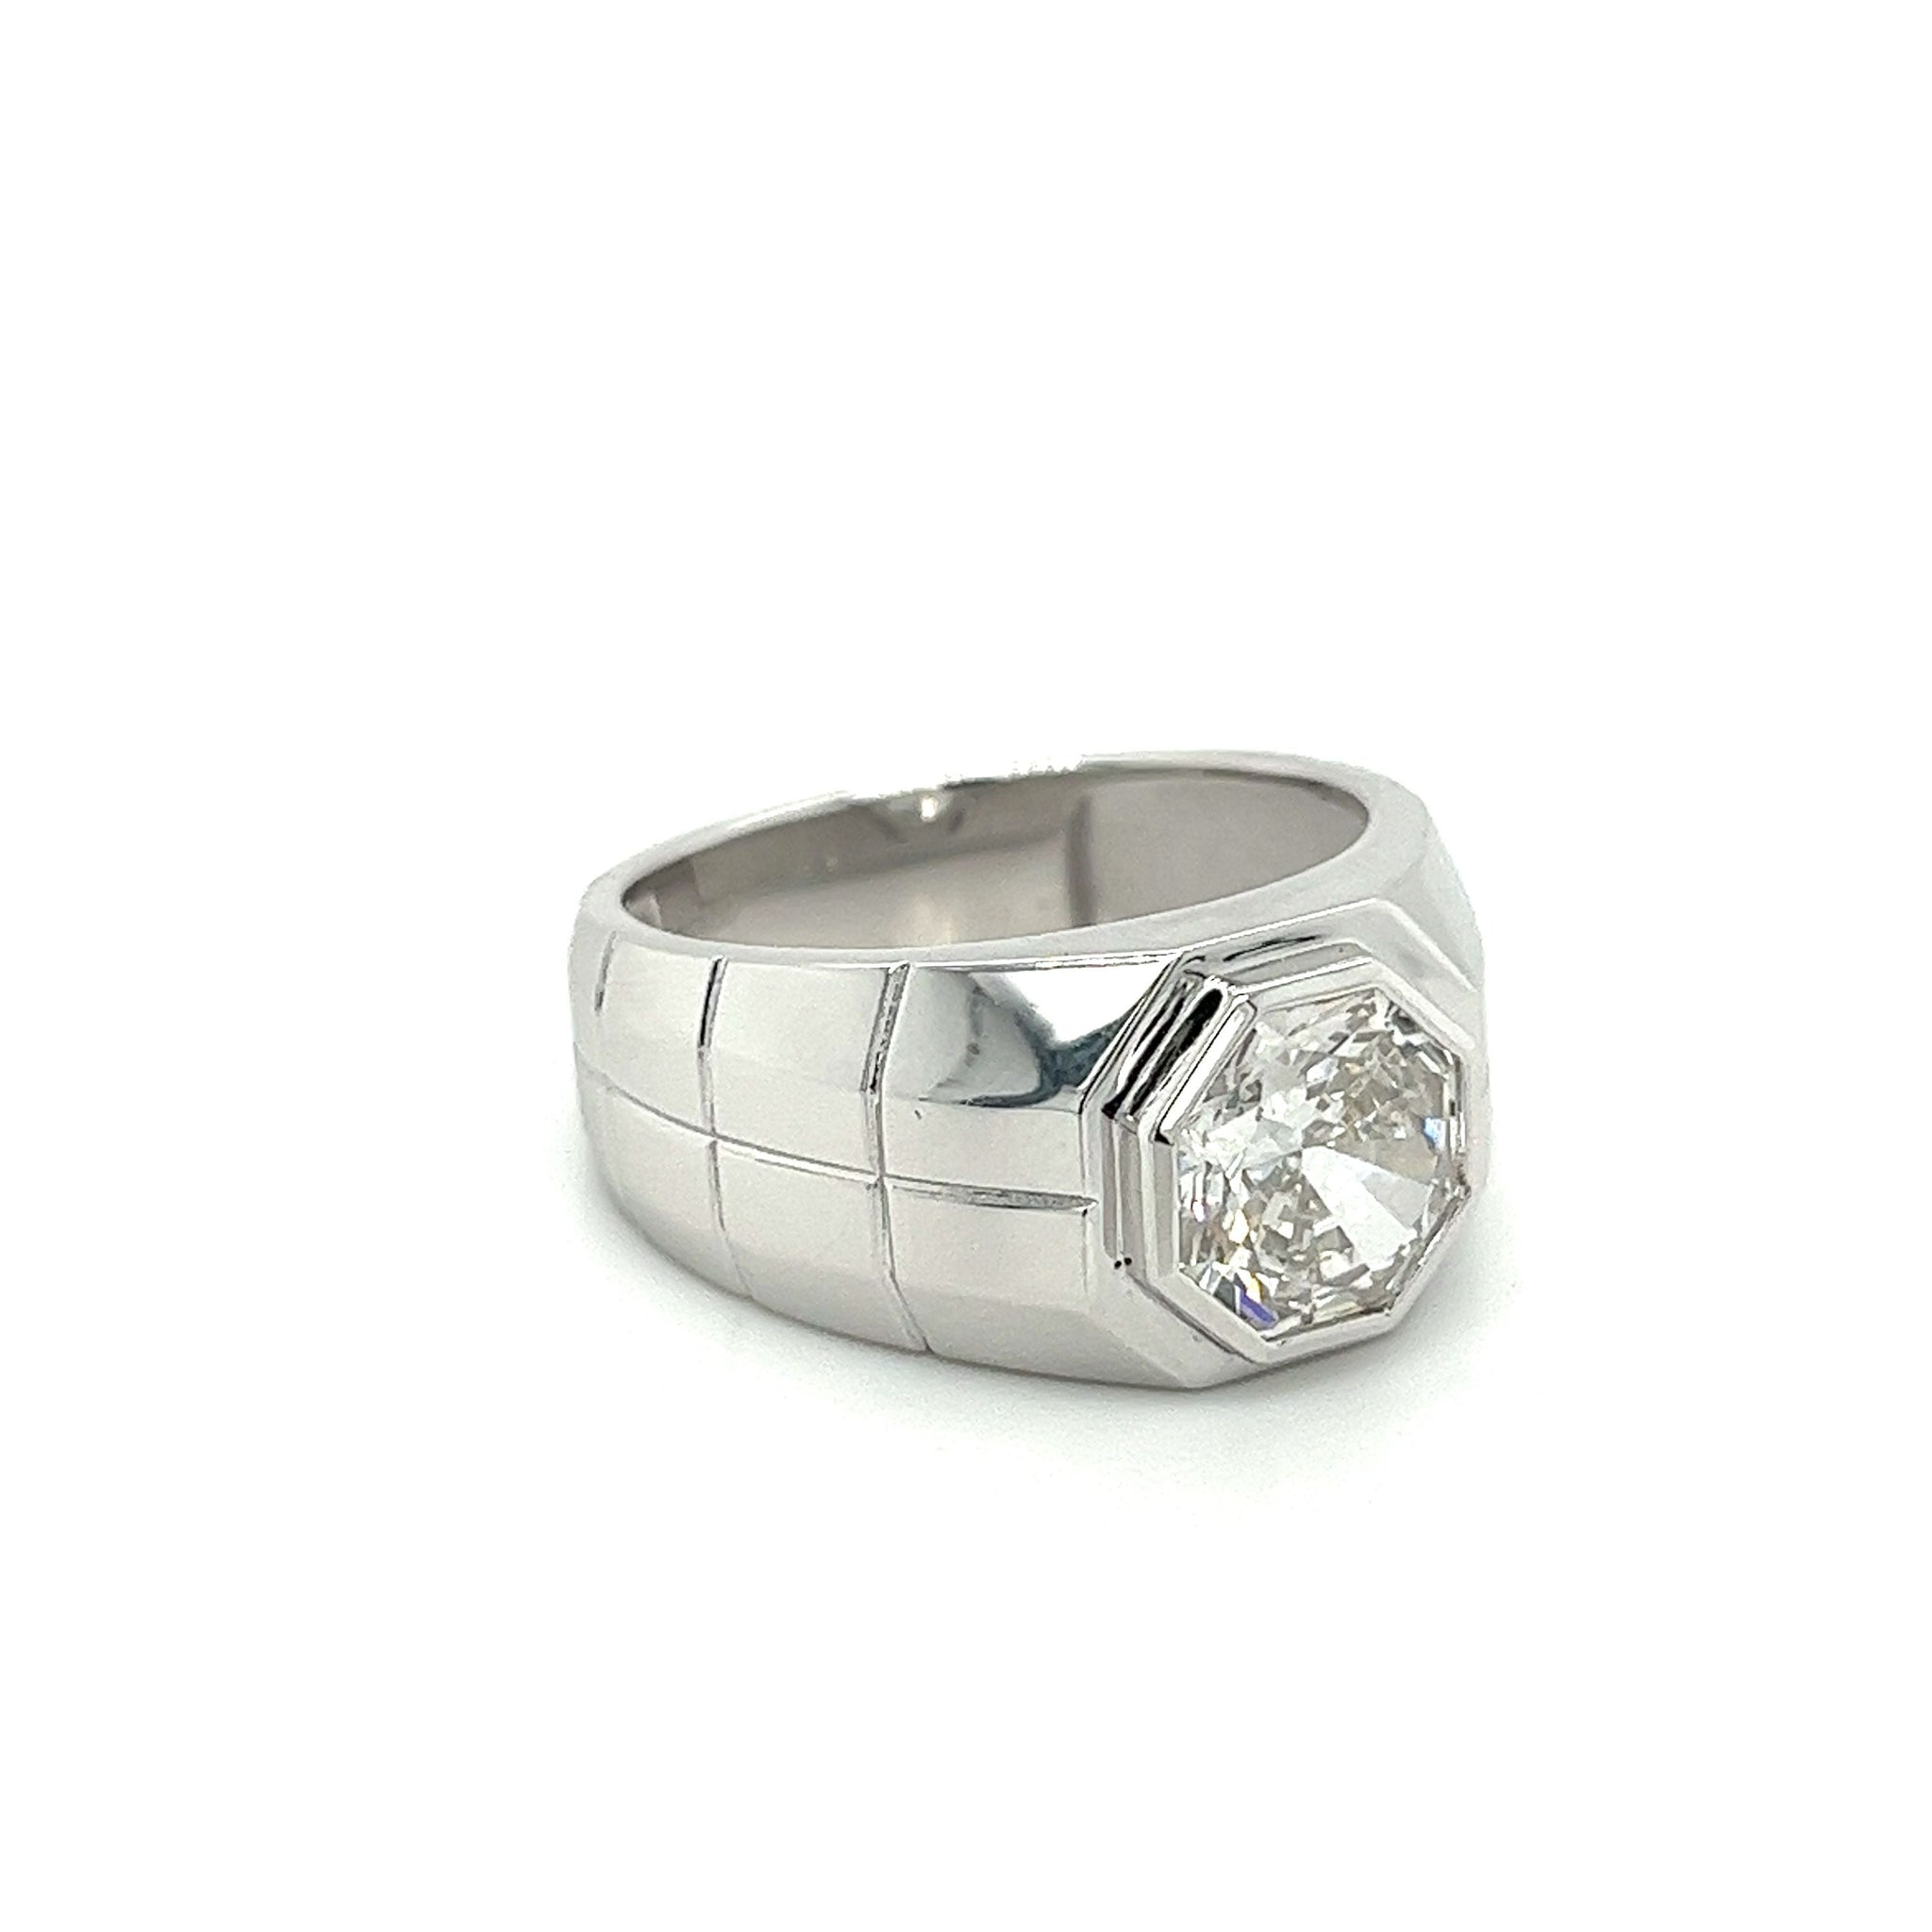 SweetJew Men's Wedding Rings 925 Sterling Silver Ring 1ct 10 Large Princess  Cut White AAAAA Cubic Zirconia Size 7 | Amazon.com